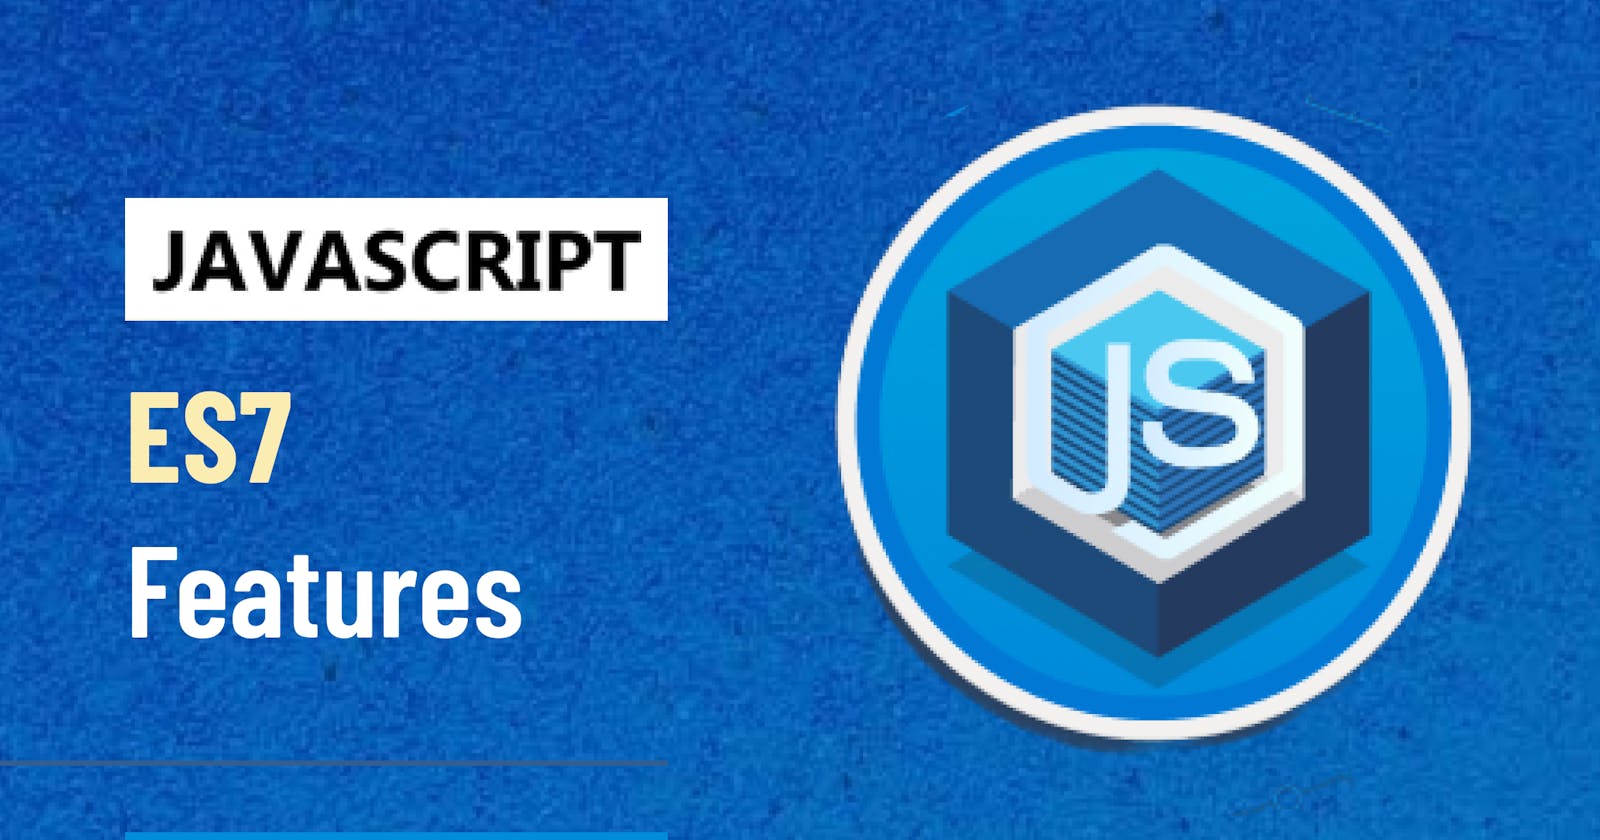 SOME AWESOME FEATURES OF JAVASCRIPT ECMAScript 2016 (ES7)!